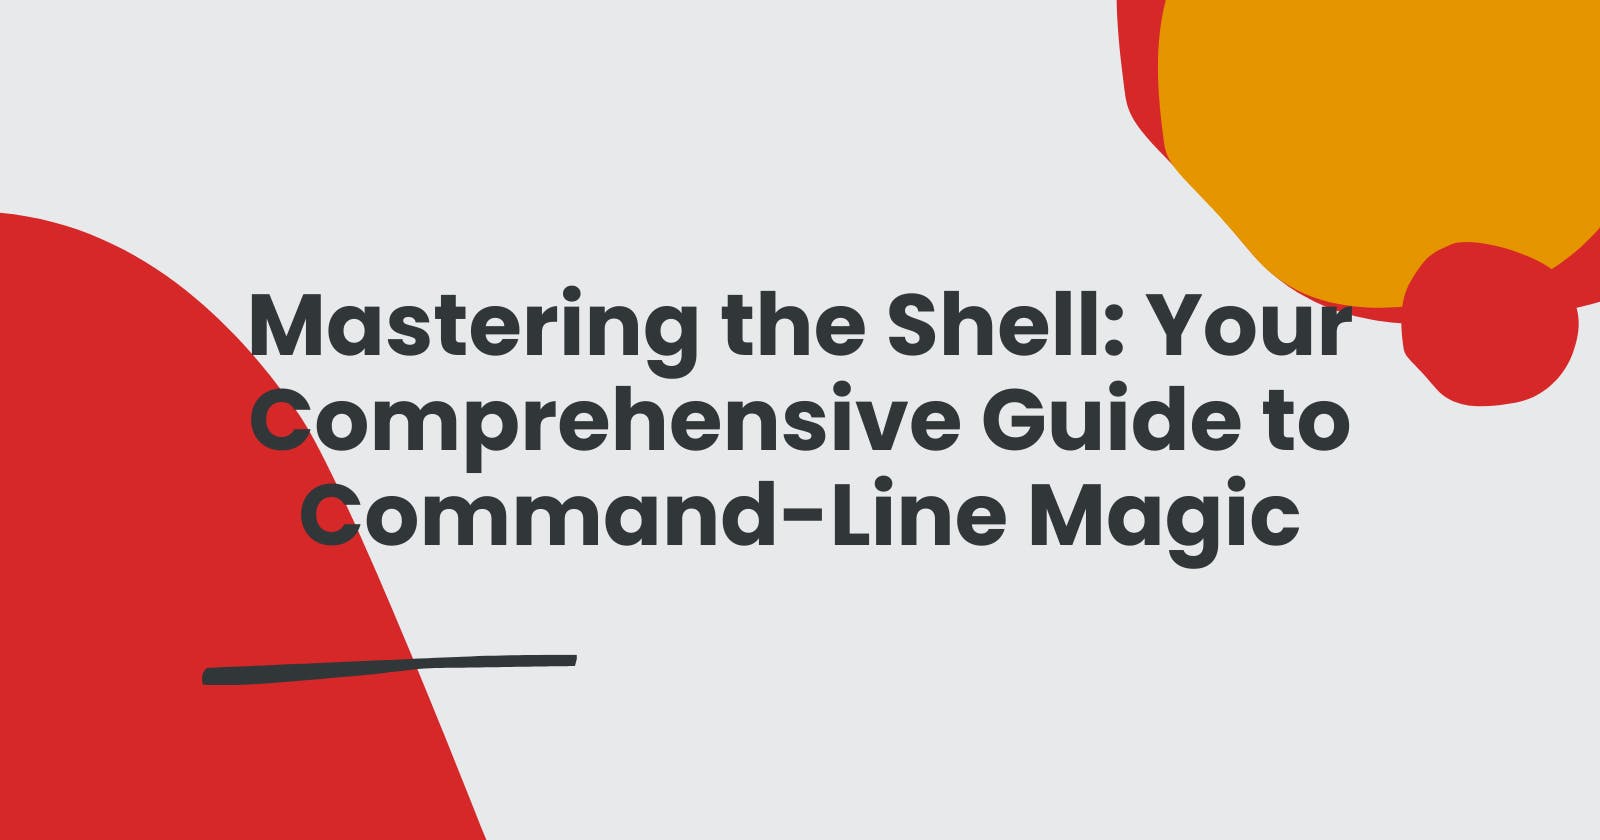 Mastering the Shell: Your Comprehensive Guide to Command-Line Magic